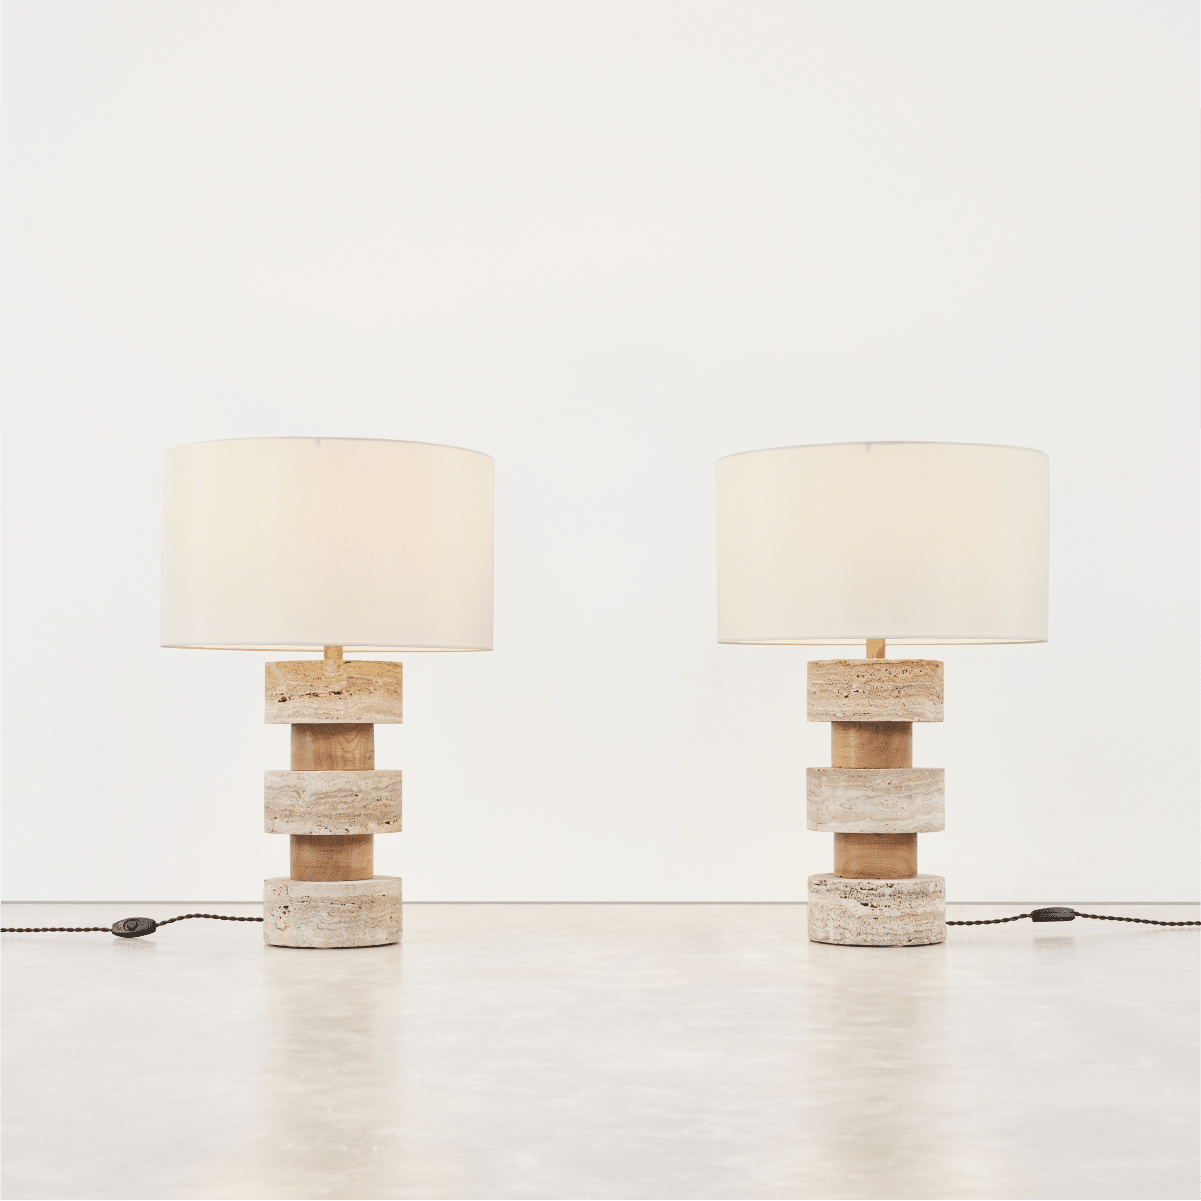 Low res for web_Stacked Marble and Wood Table Lamps-